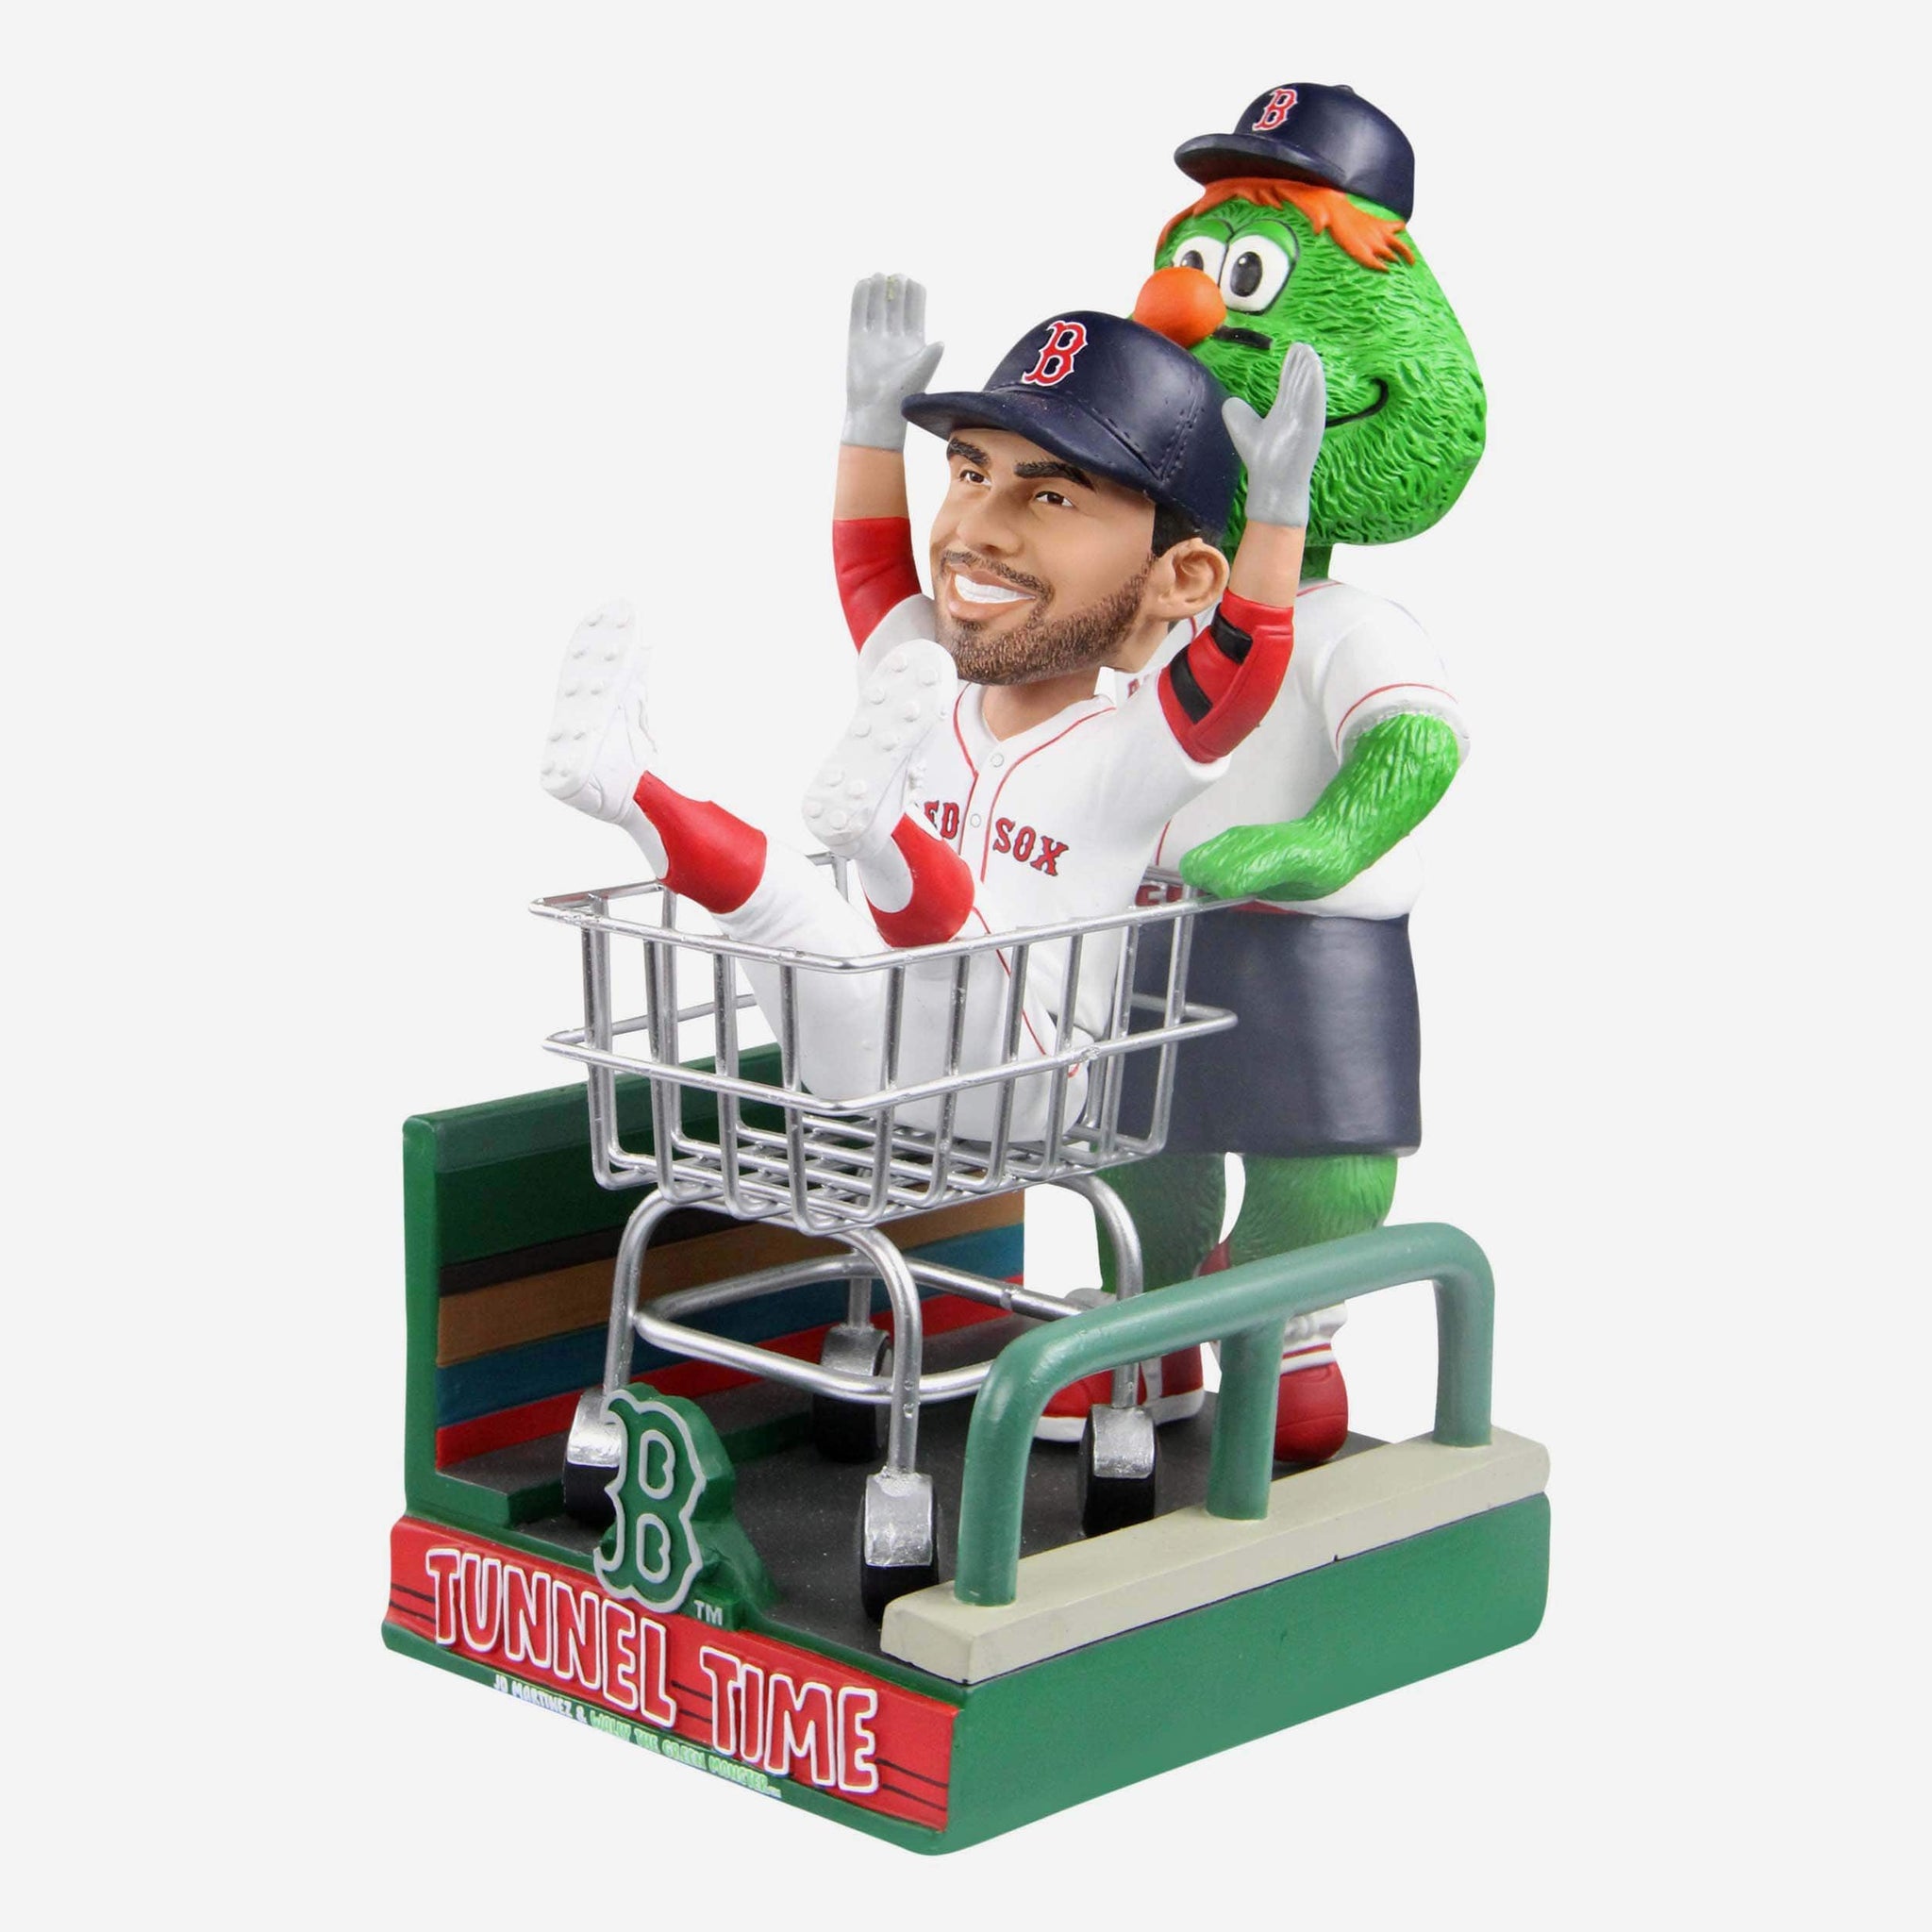 JD Martinez & Wally The Green Monster Boston Red Sox Tunnel Time